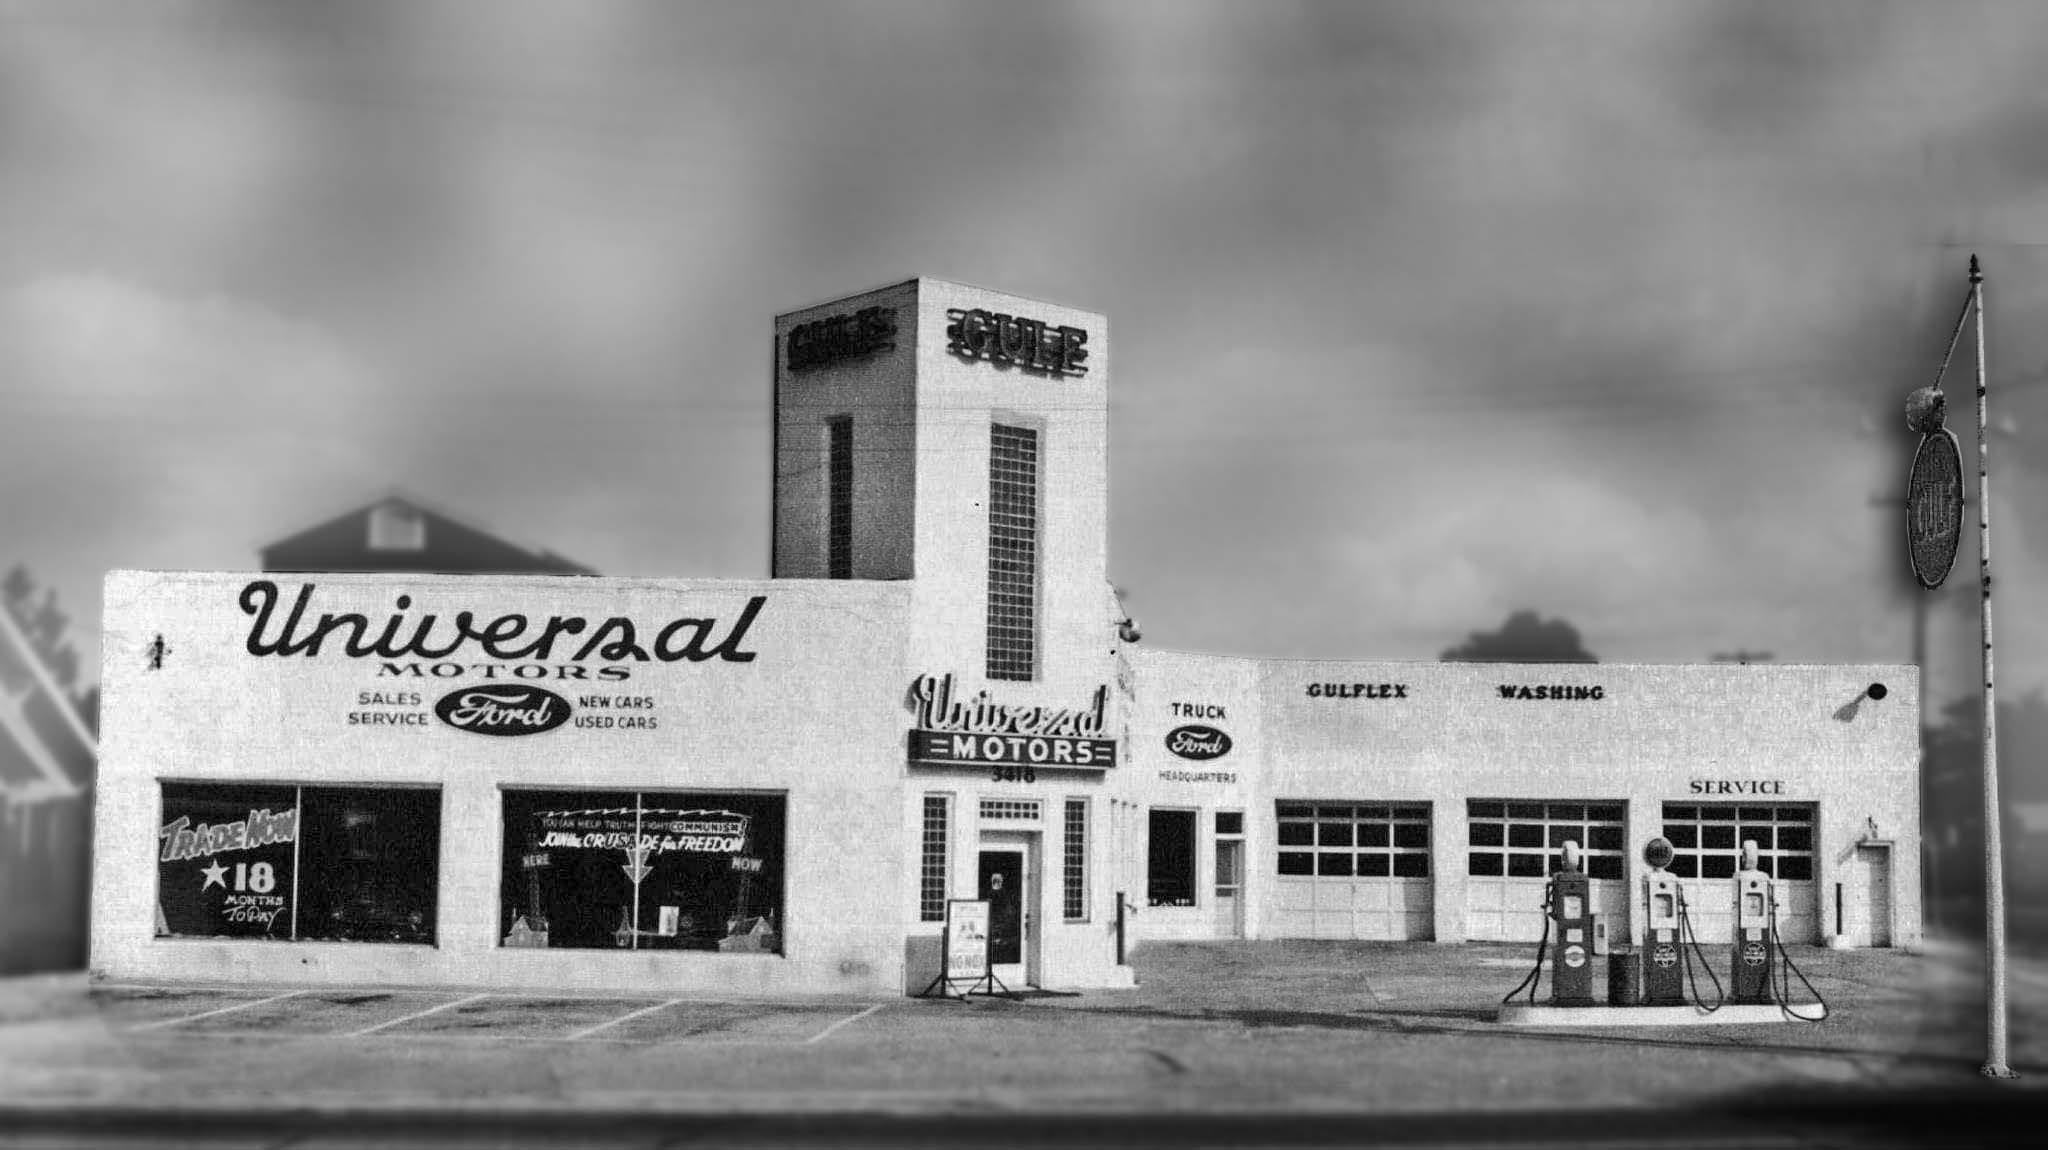 The Village Harry White Ford Dealership